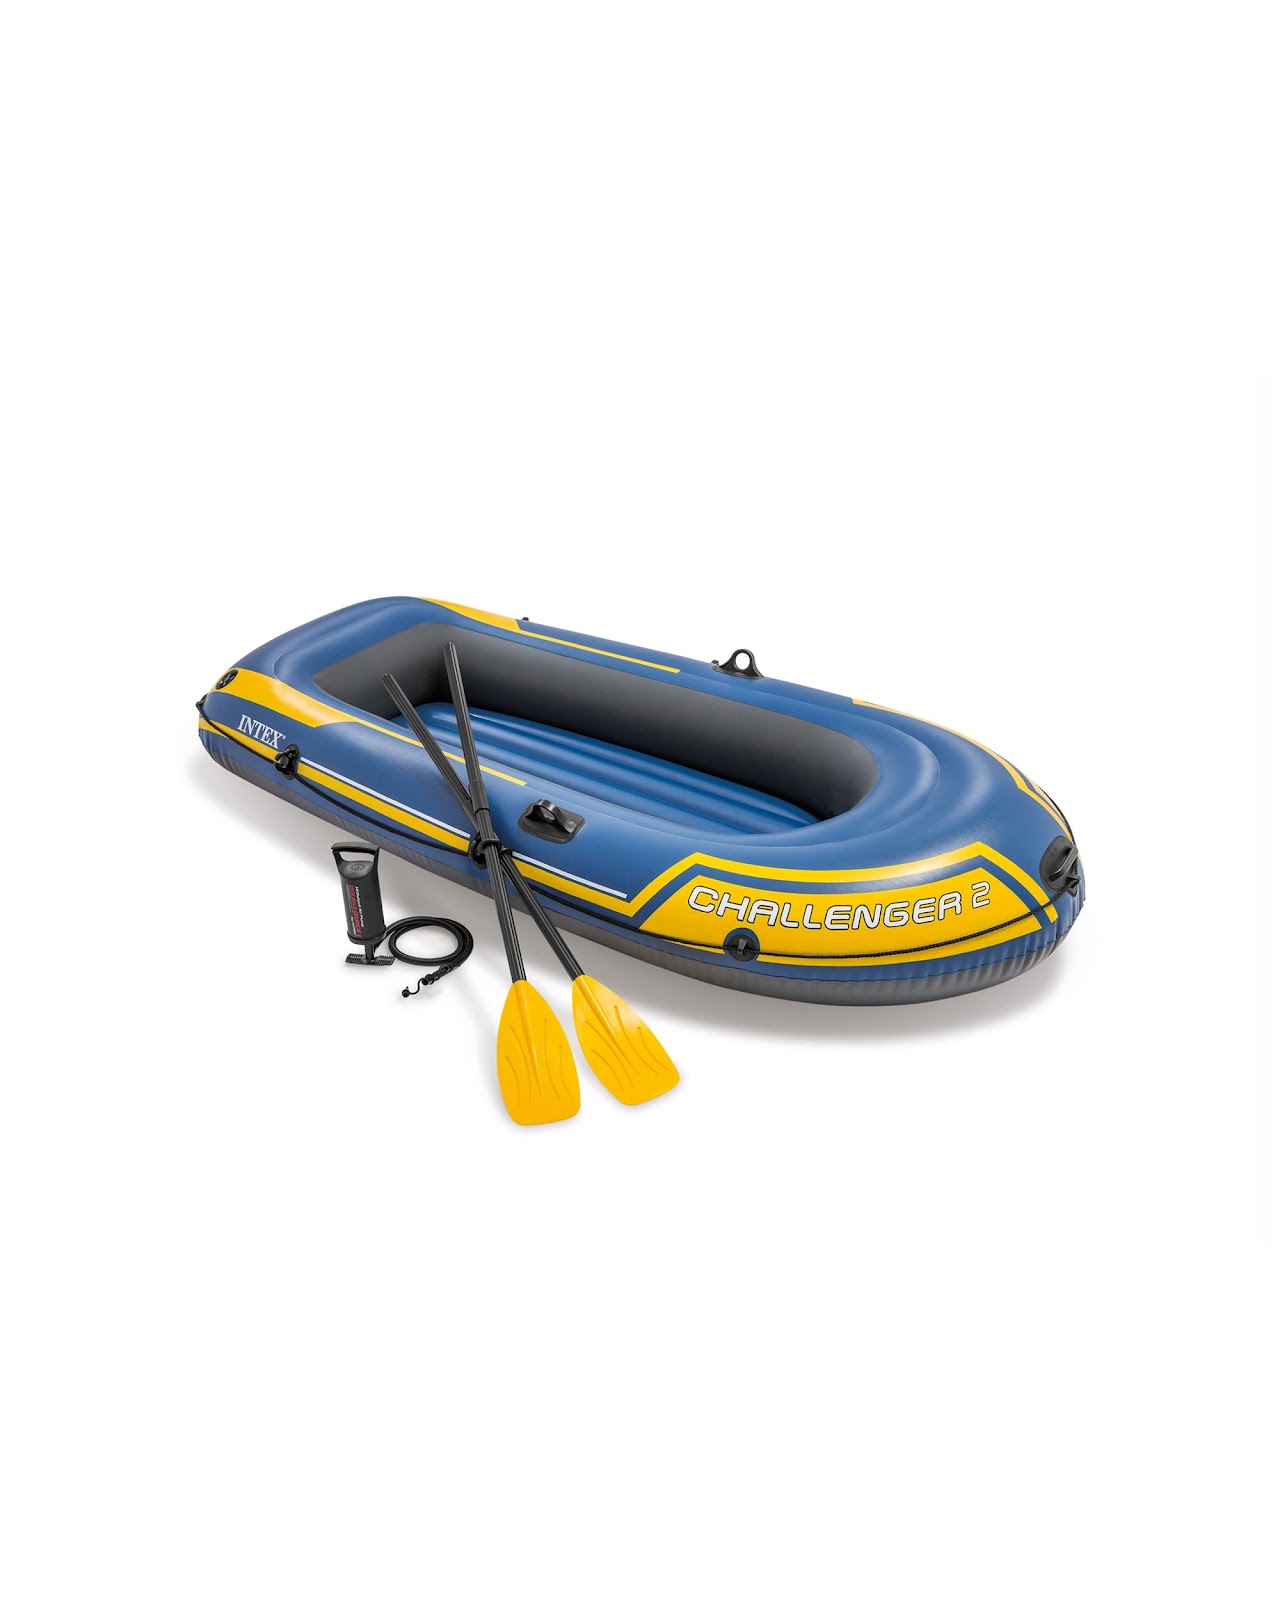 Intex Challenger Inflatable Boat